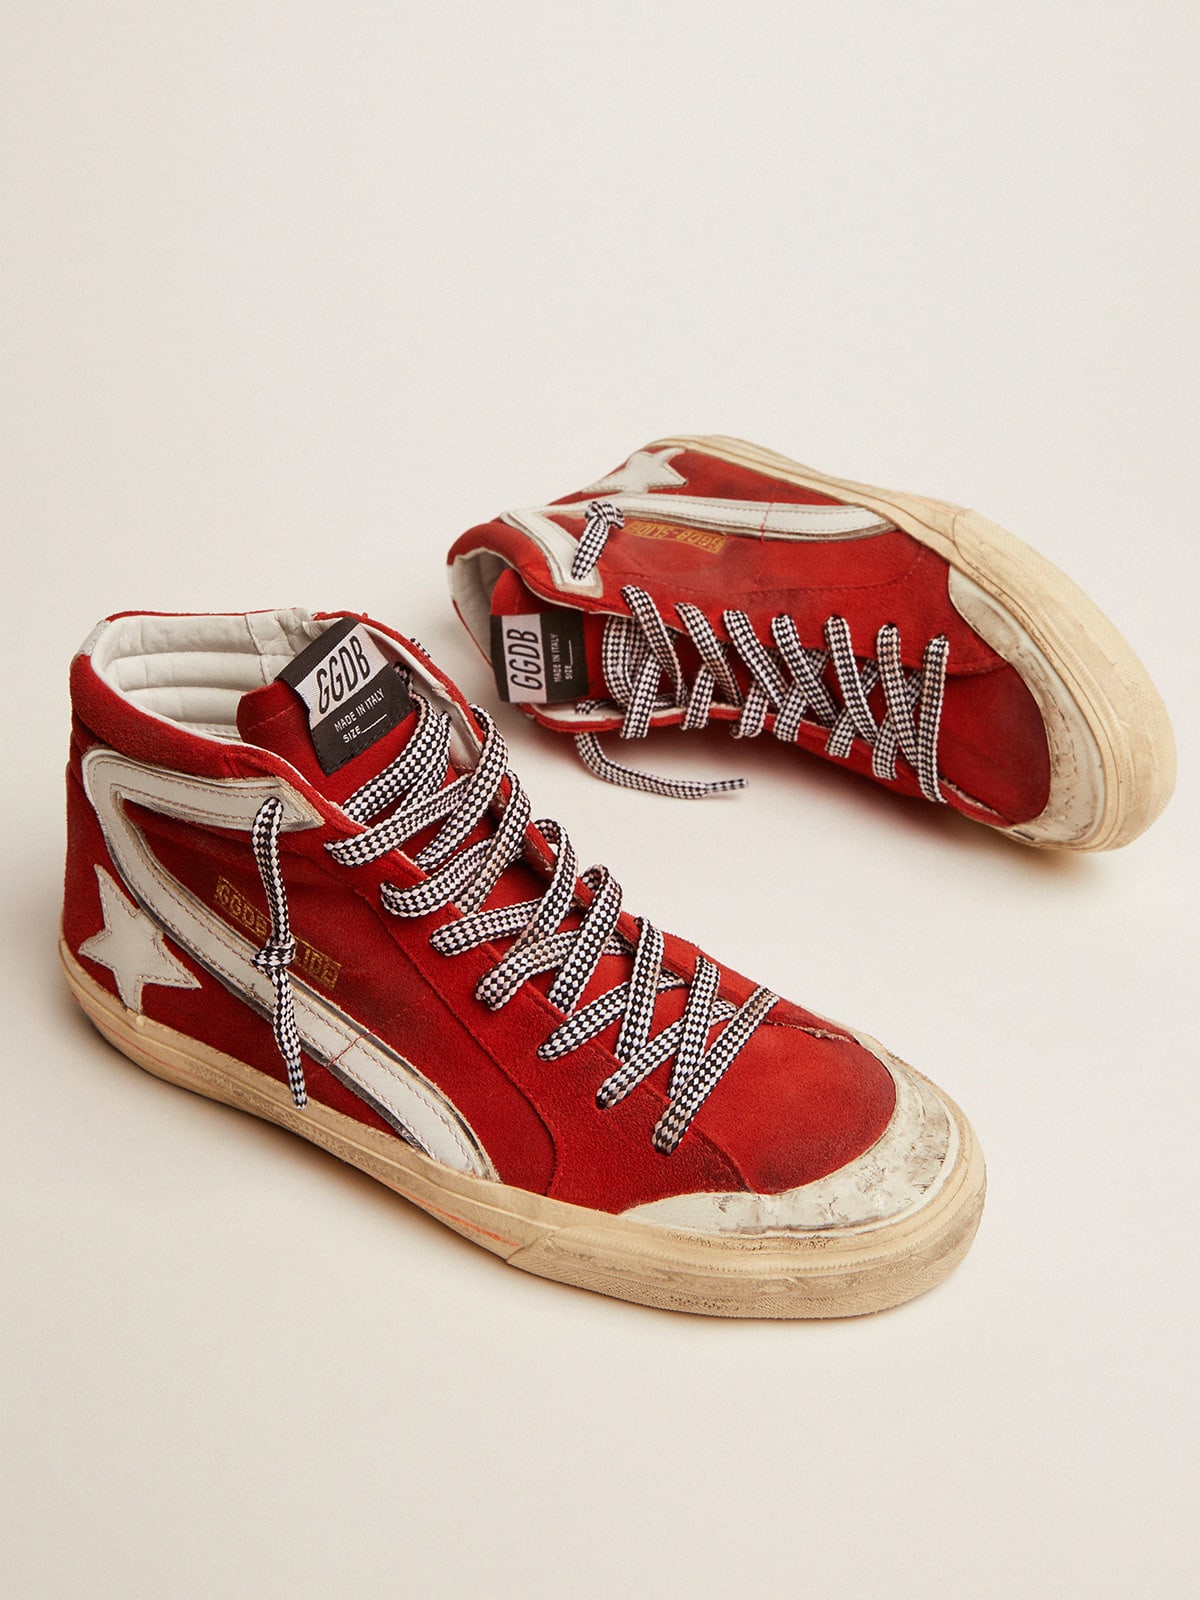 Golden Goose - Penstar Slide sneakers in red suede with white details in 